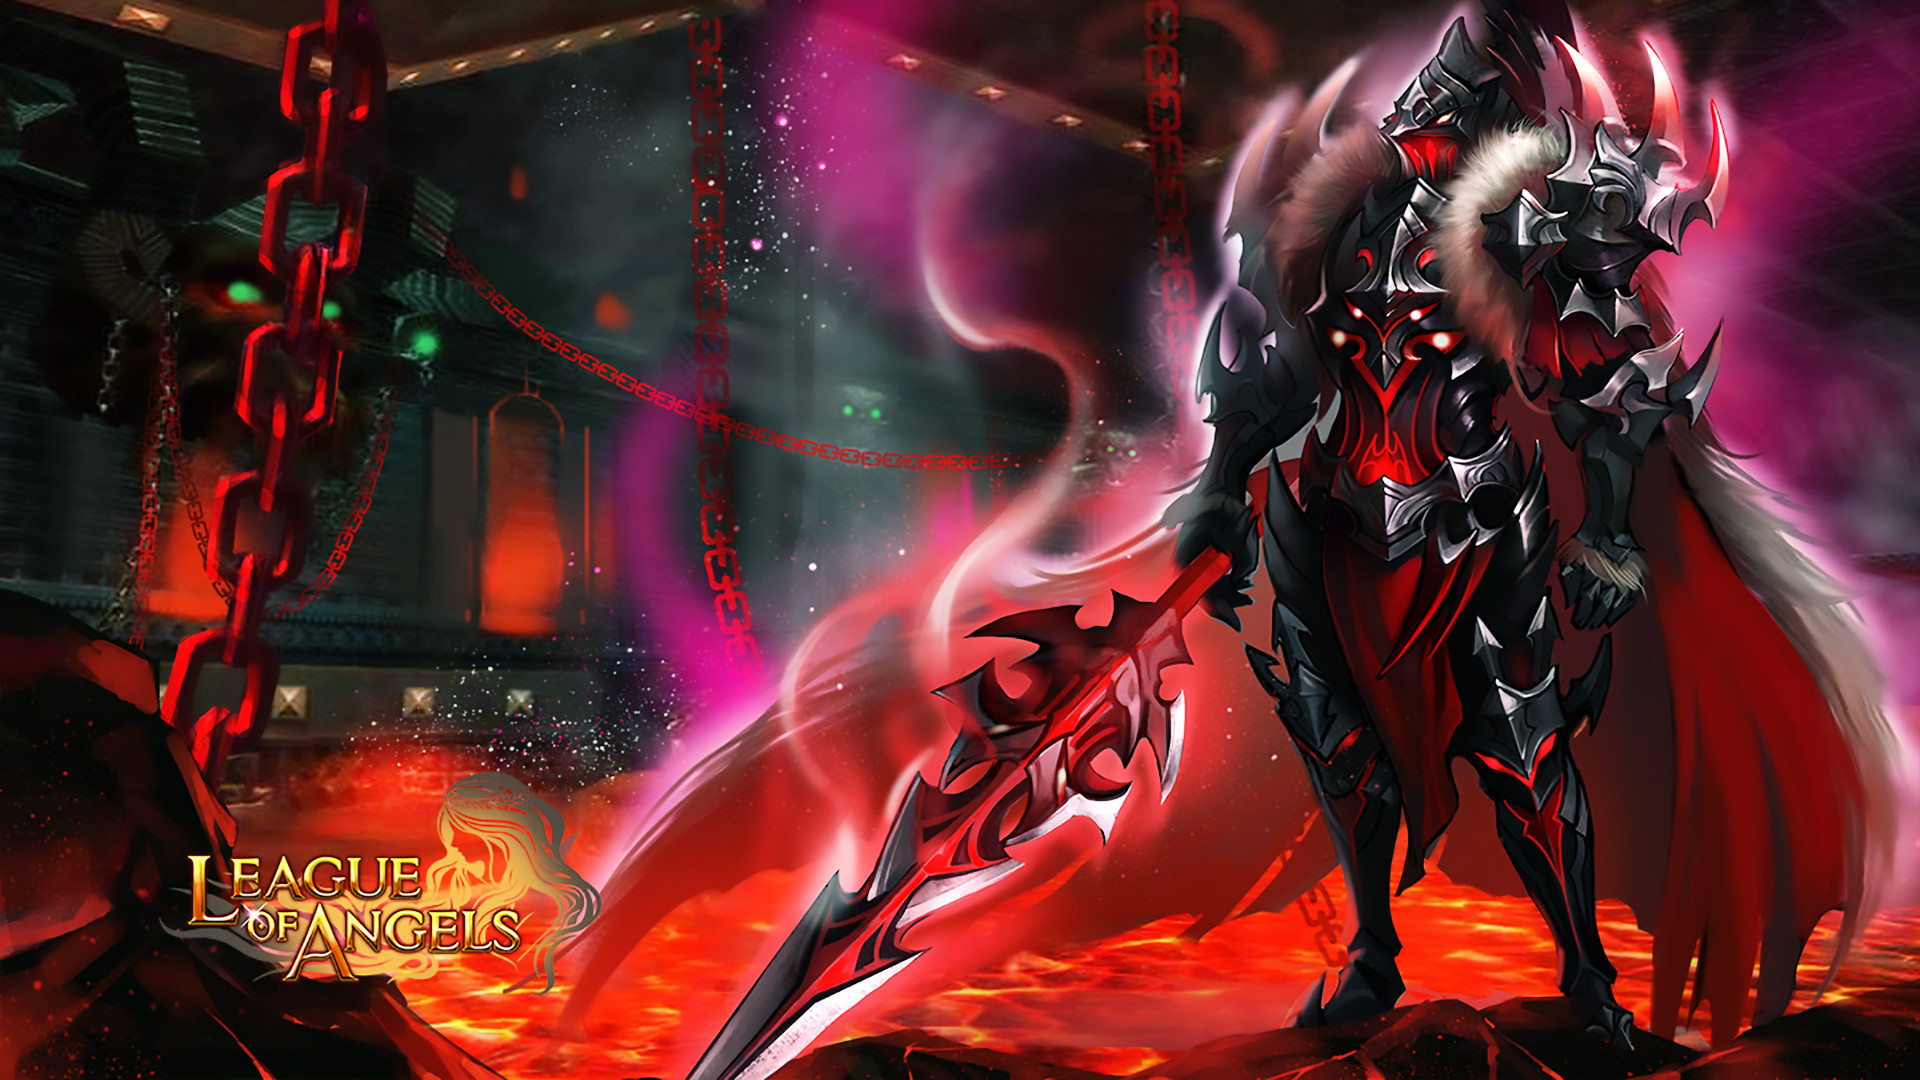 Dark Paladin Mysterious Warrior Armed With Sword Magical - Dark Paladin League Of Angels - HD Wallpaper 